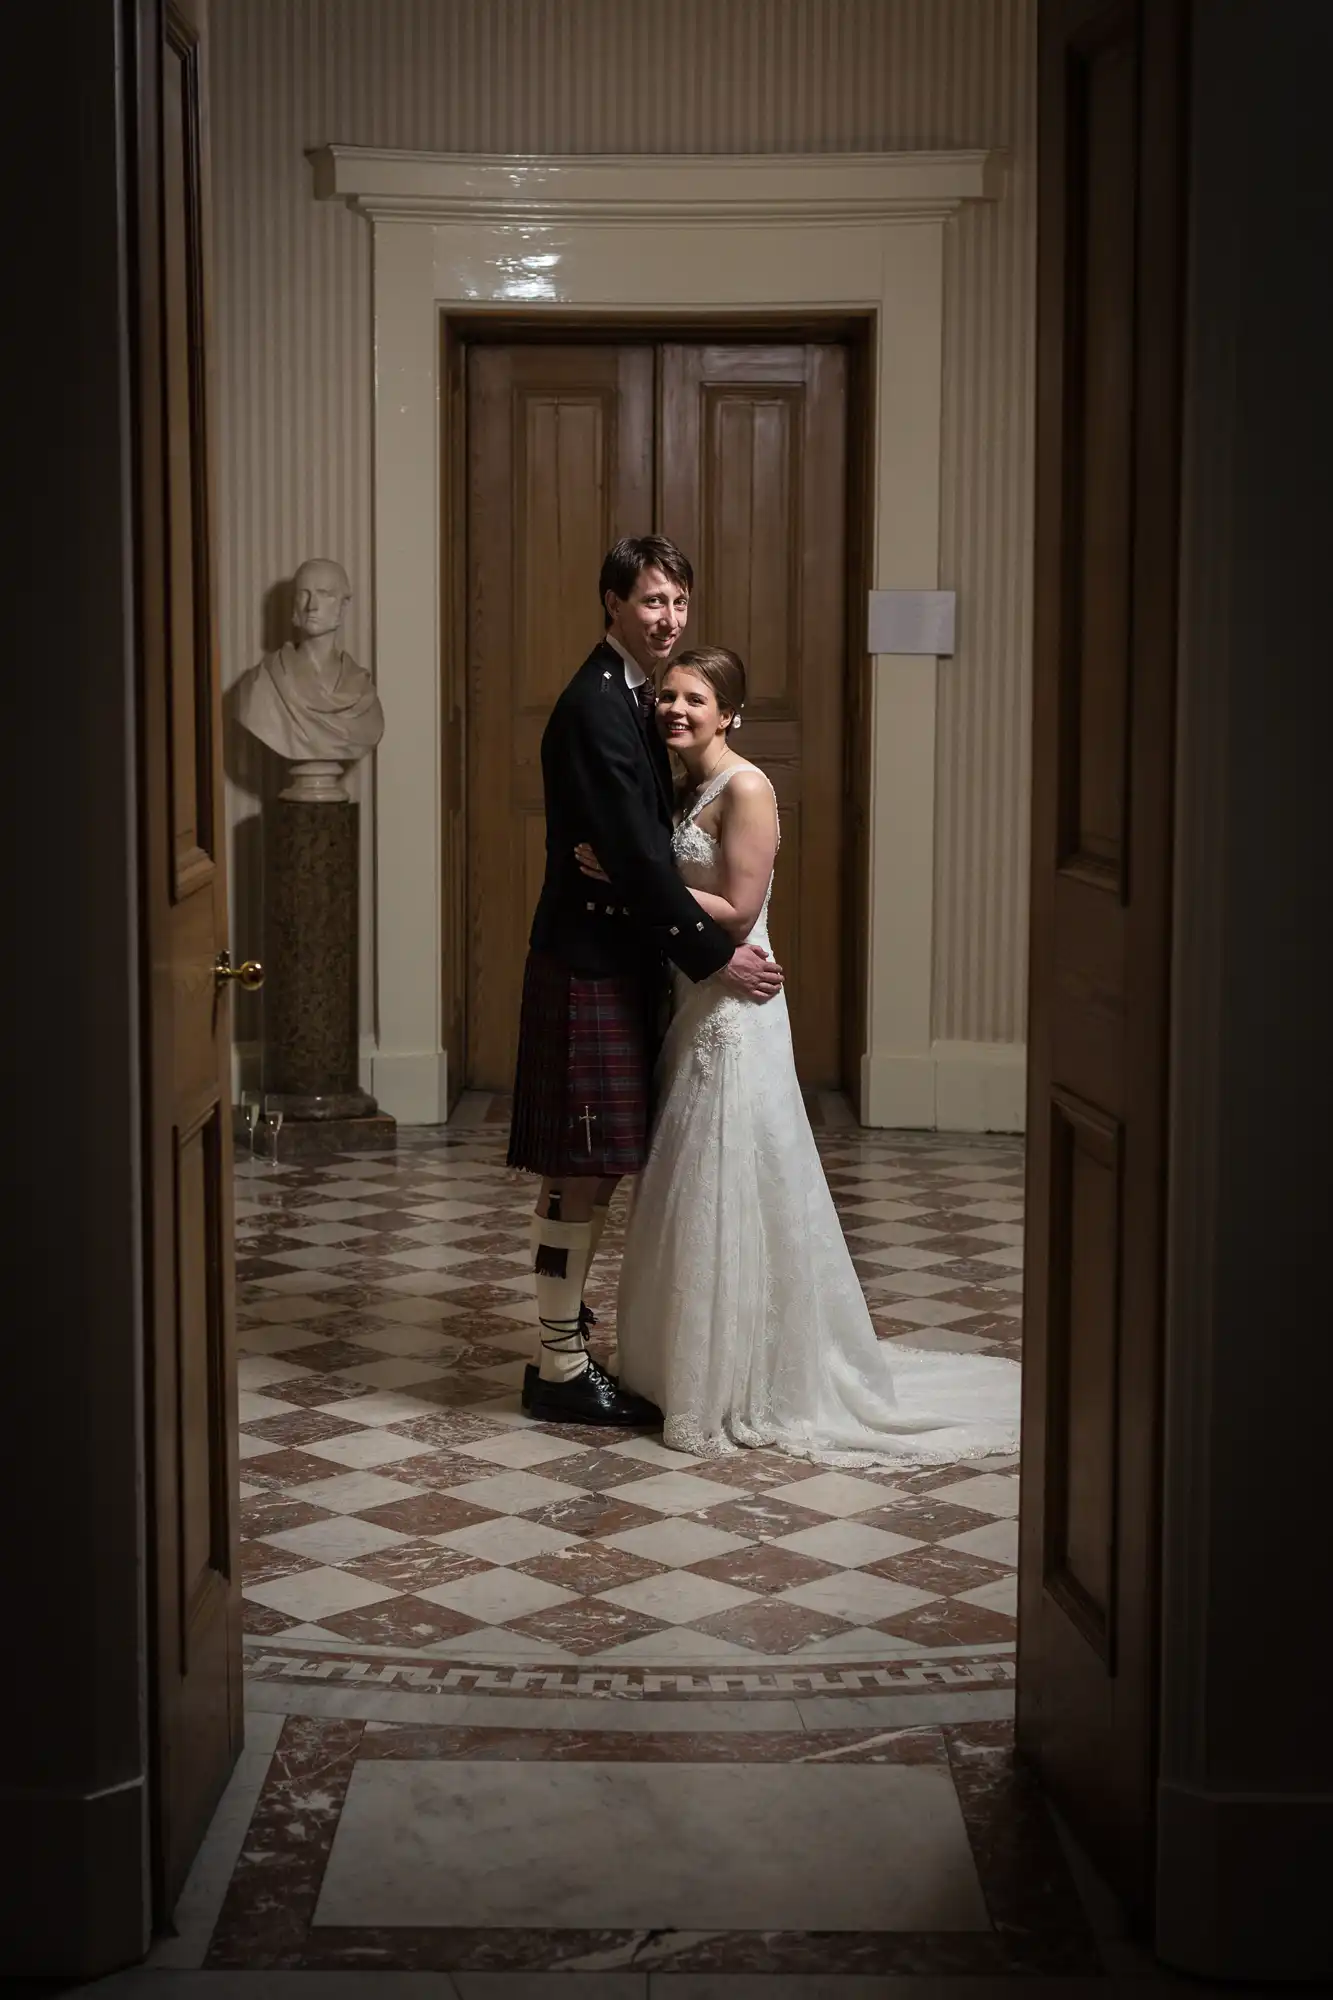 A bride and groom embracing in a hallway, the groom in a kilt and the bride in a lace dress, with warm lighting highlighting them from the front.